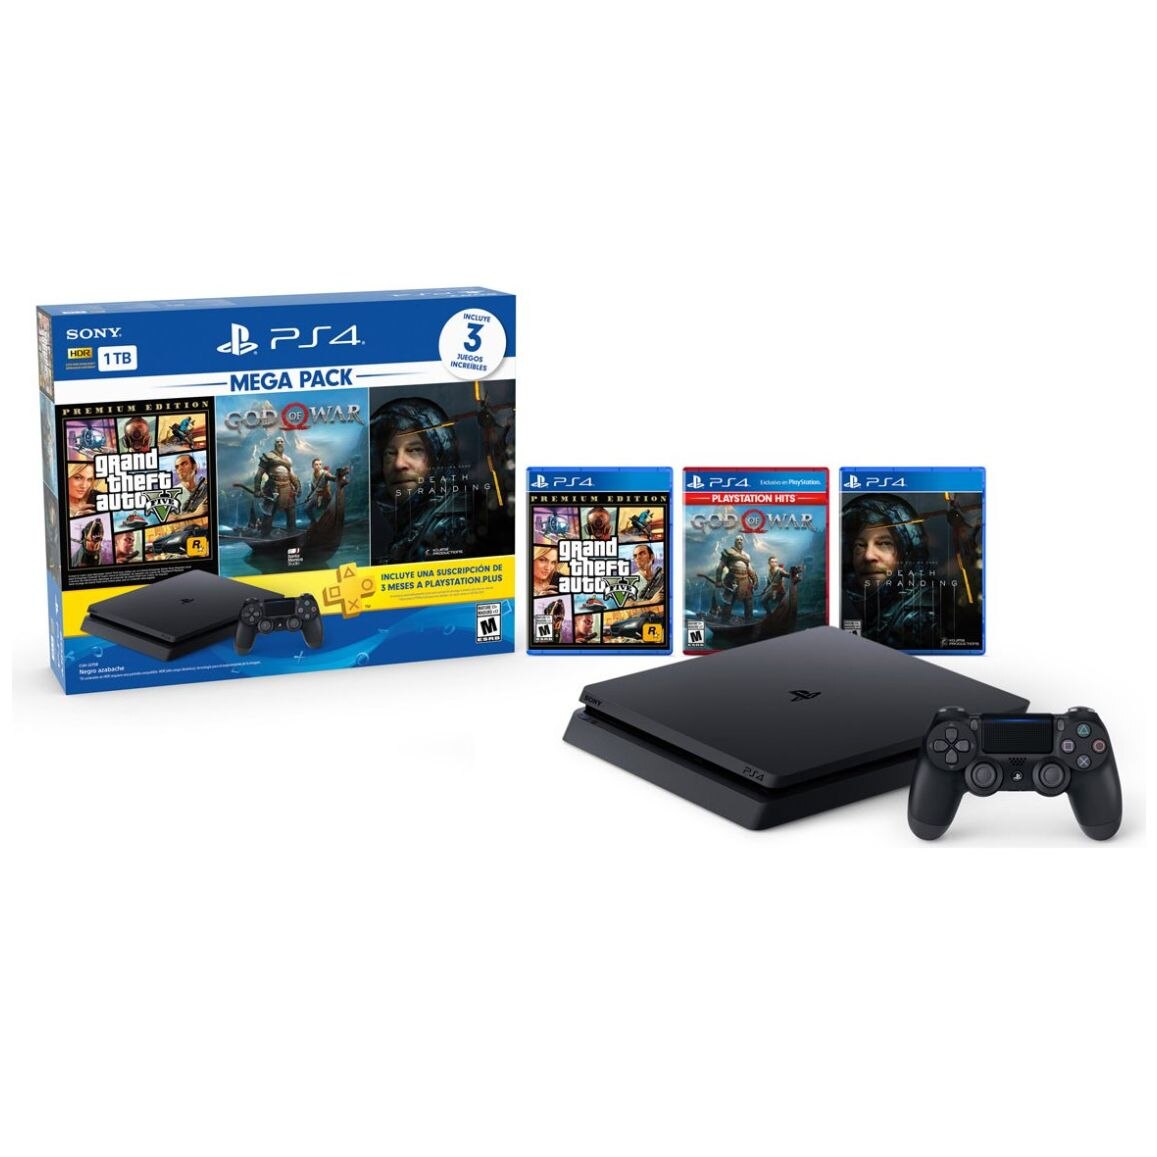 Consola Ps4 Megapack Grand Theft Auto, God Of War y Death Stranding